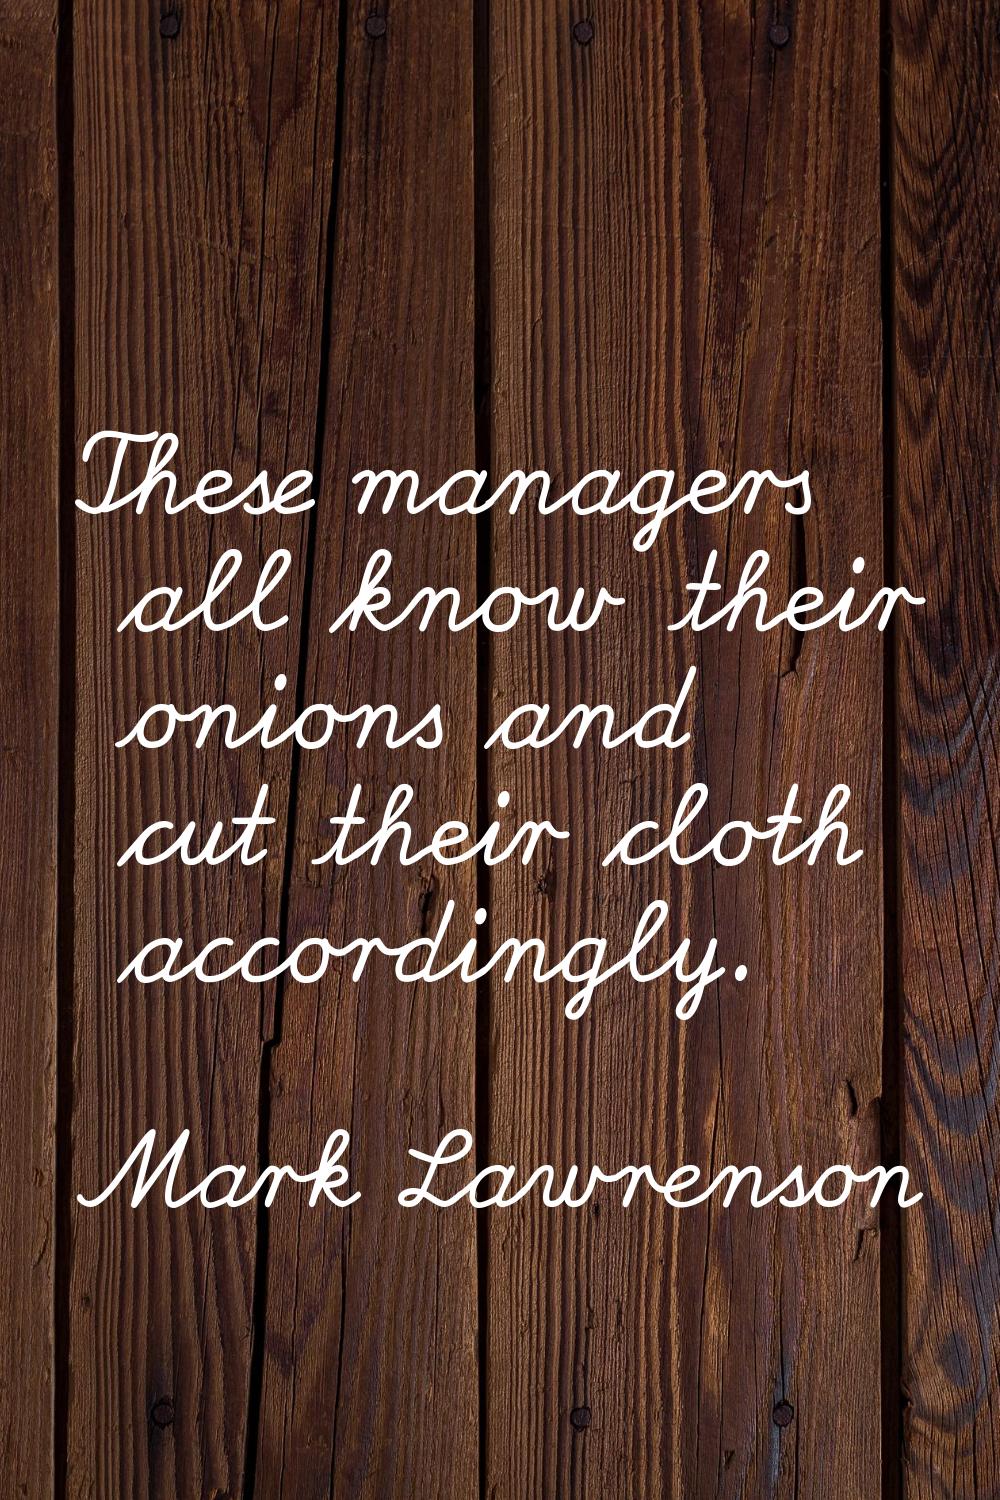 These managers all know their onions and cut their cloth accordingly.